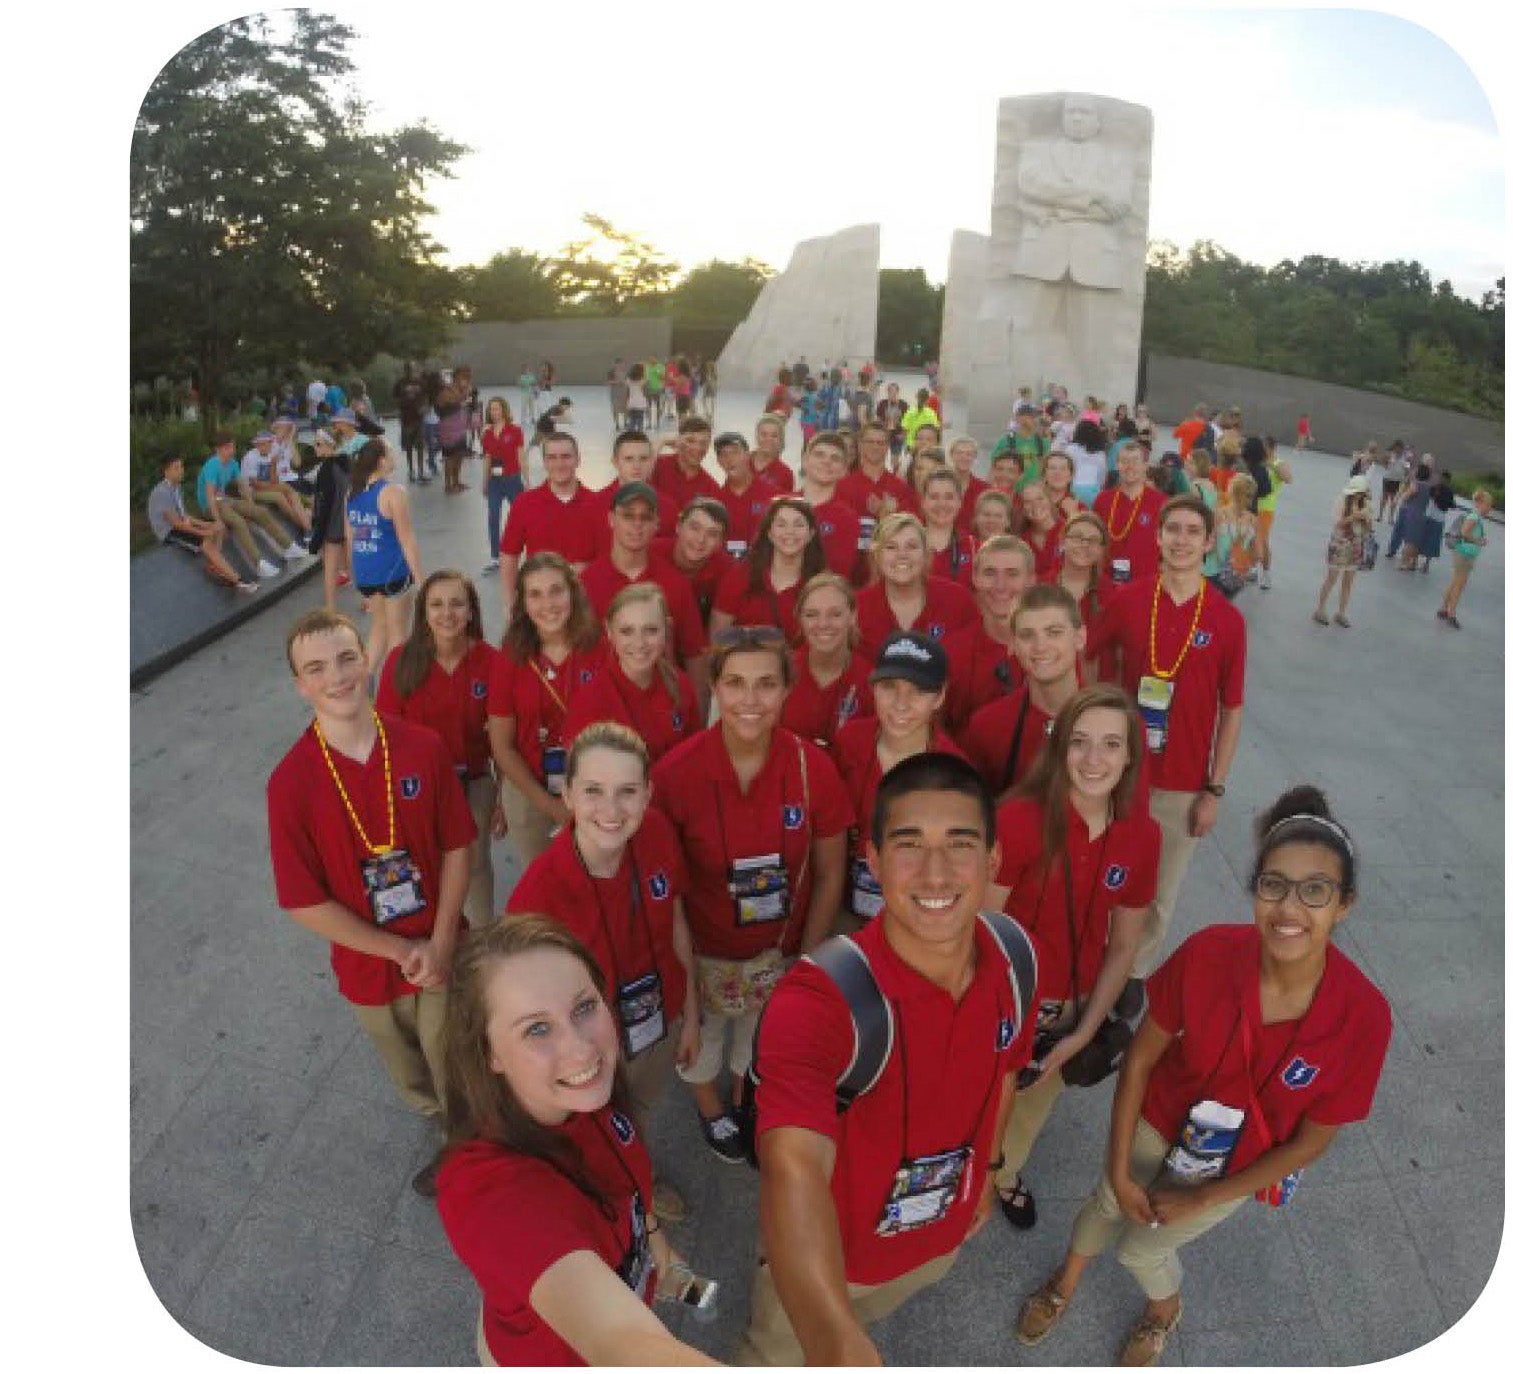 Youth tour group selfie